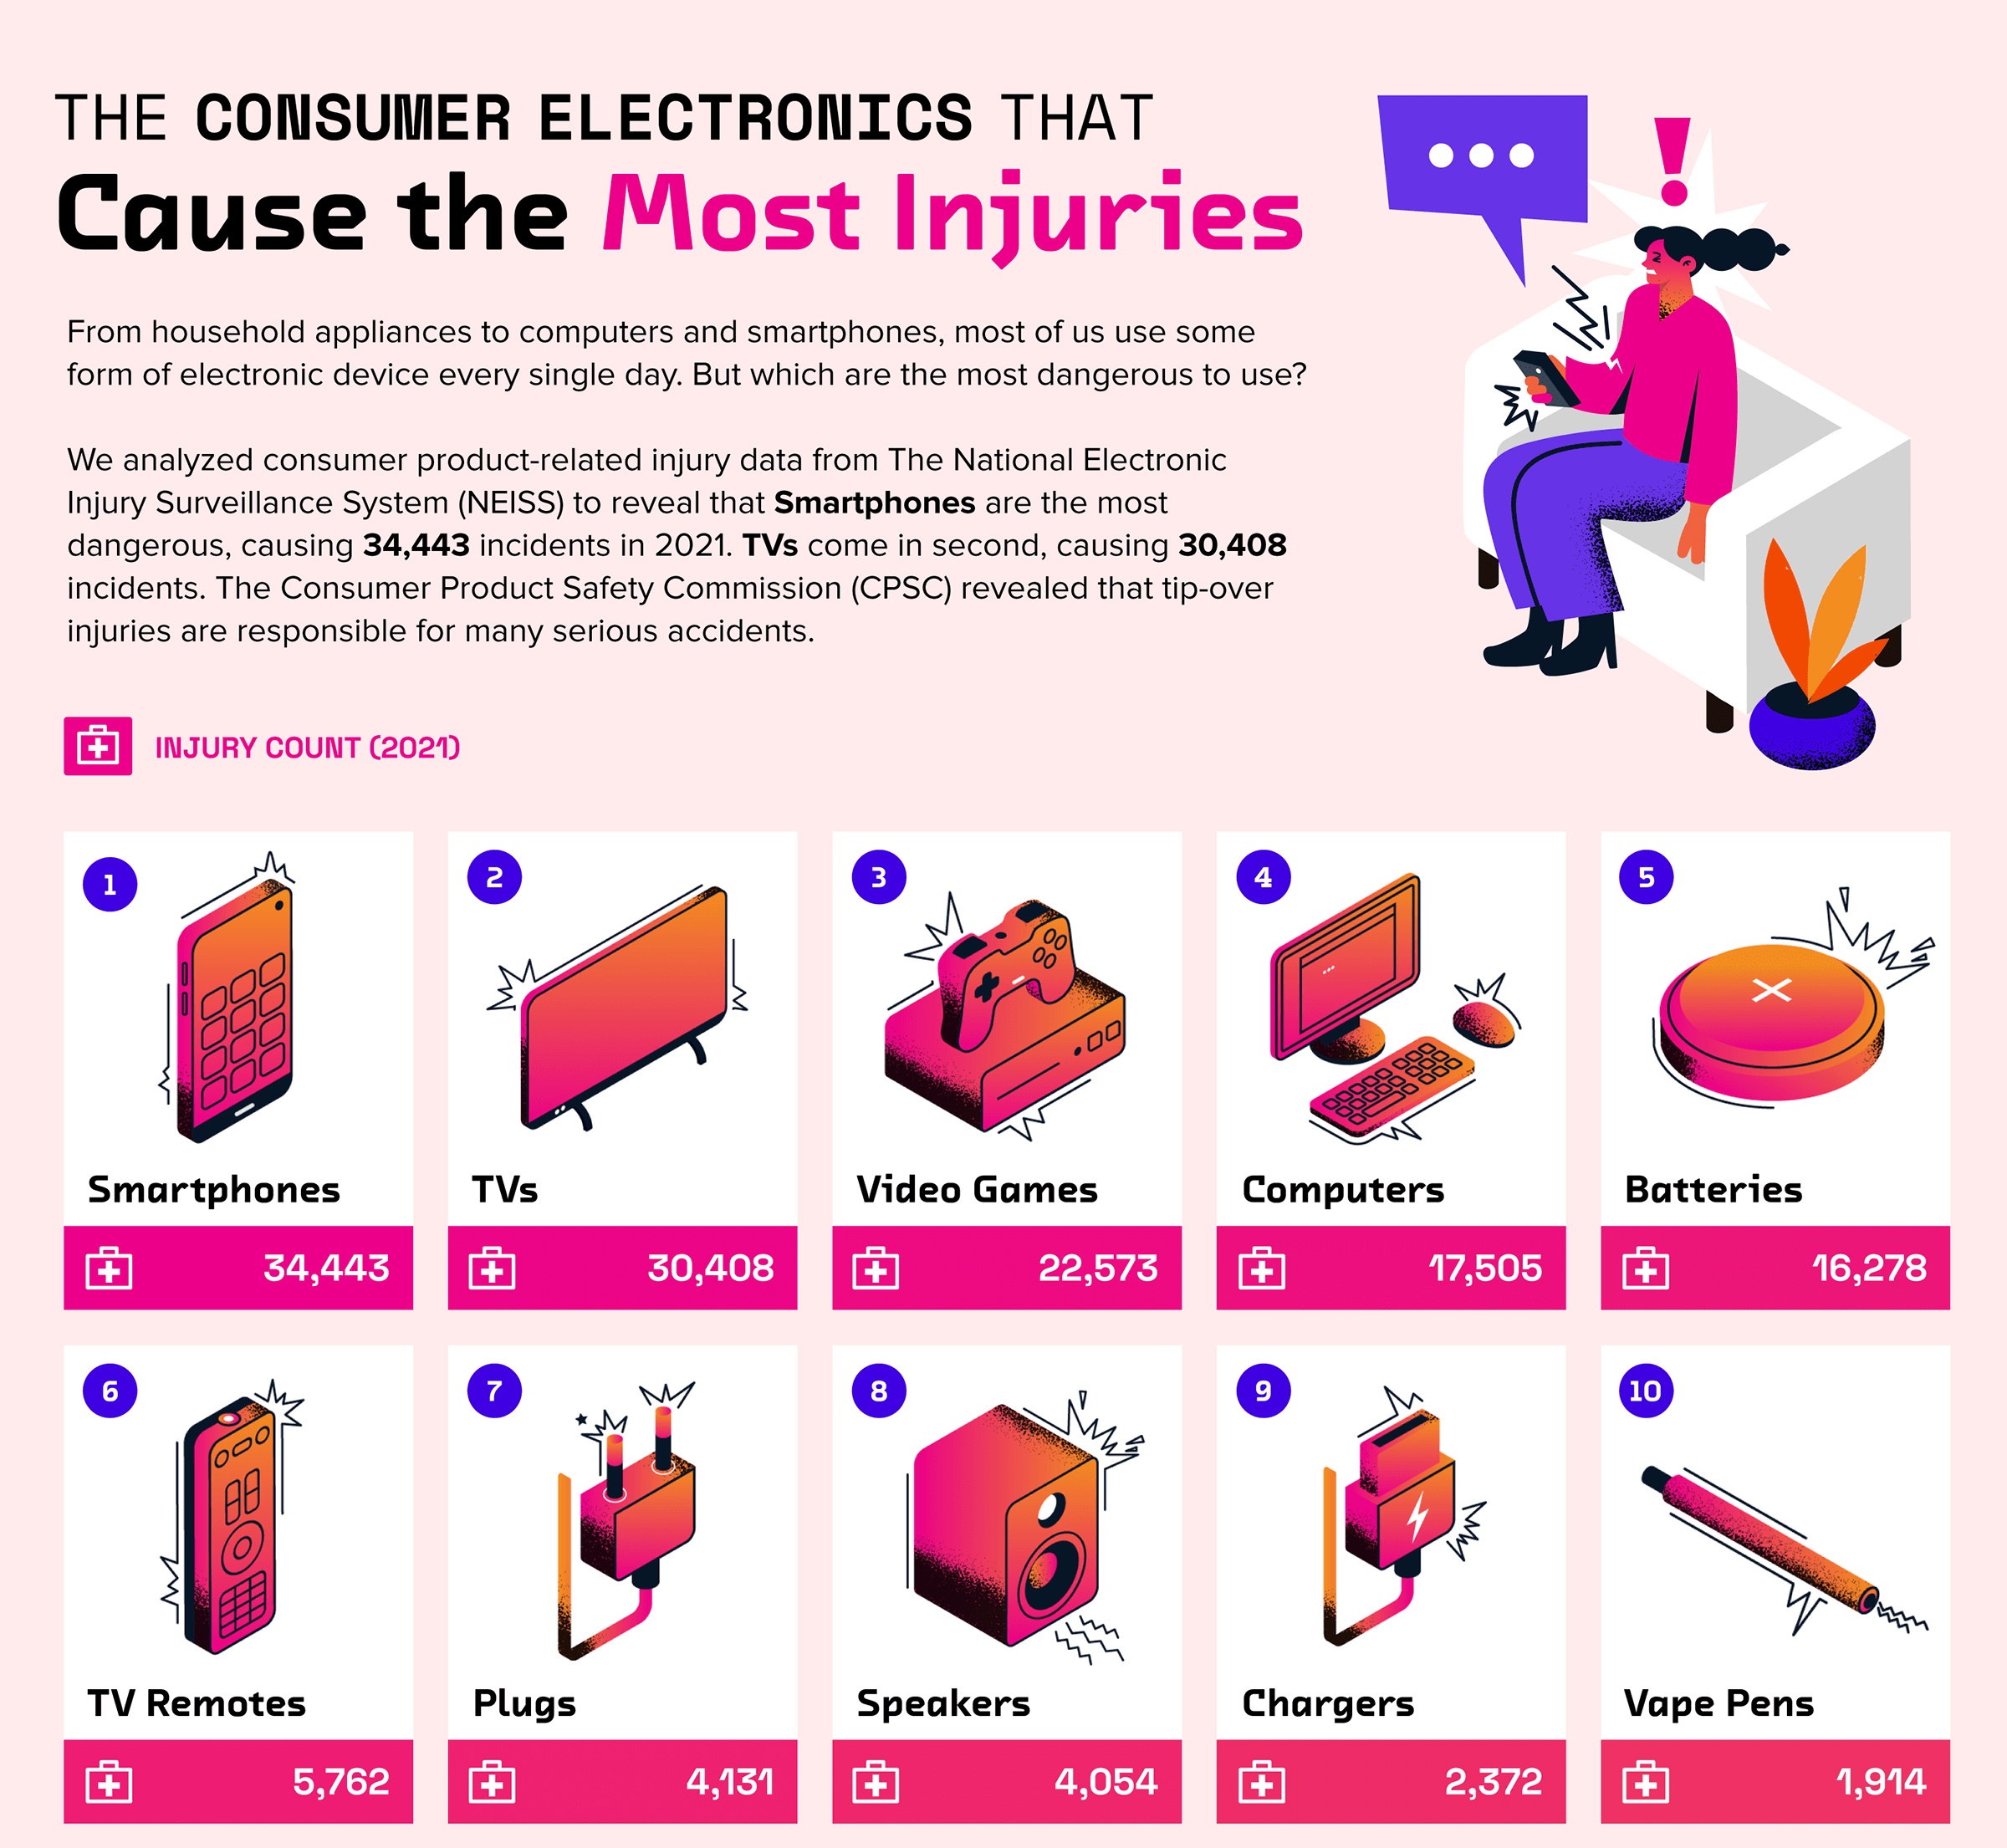 Which Consumer Electronics Cause the Most Injuries?